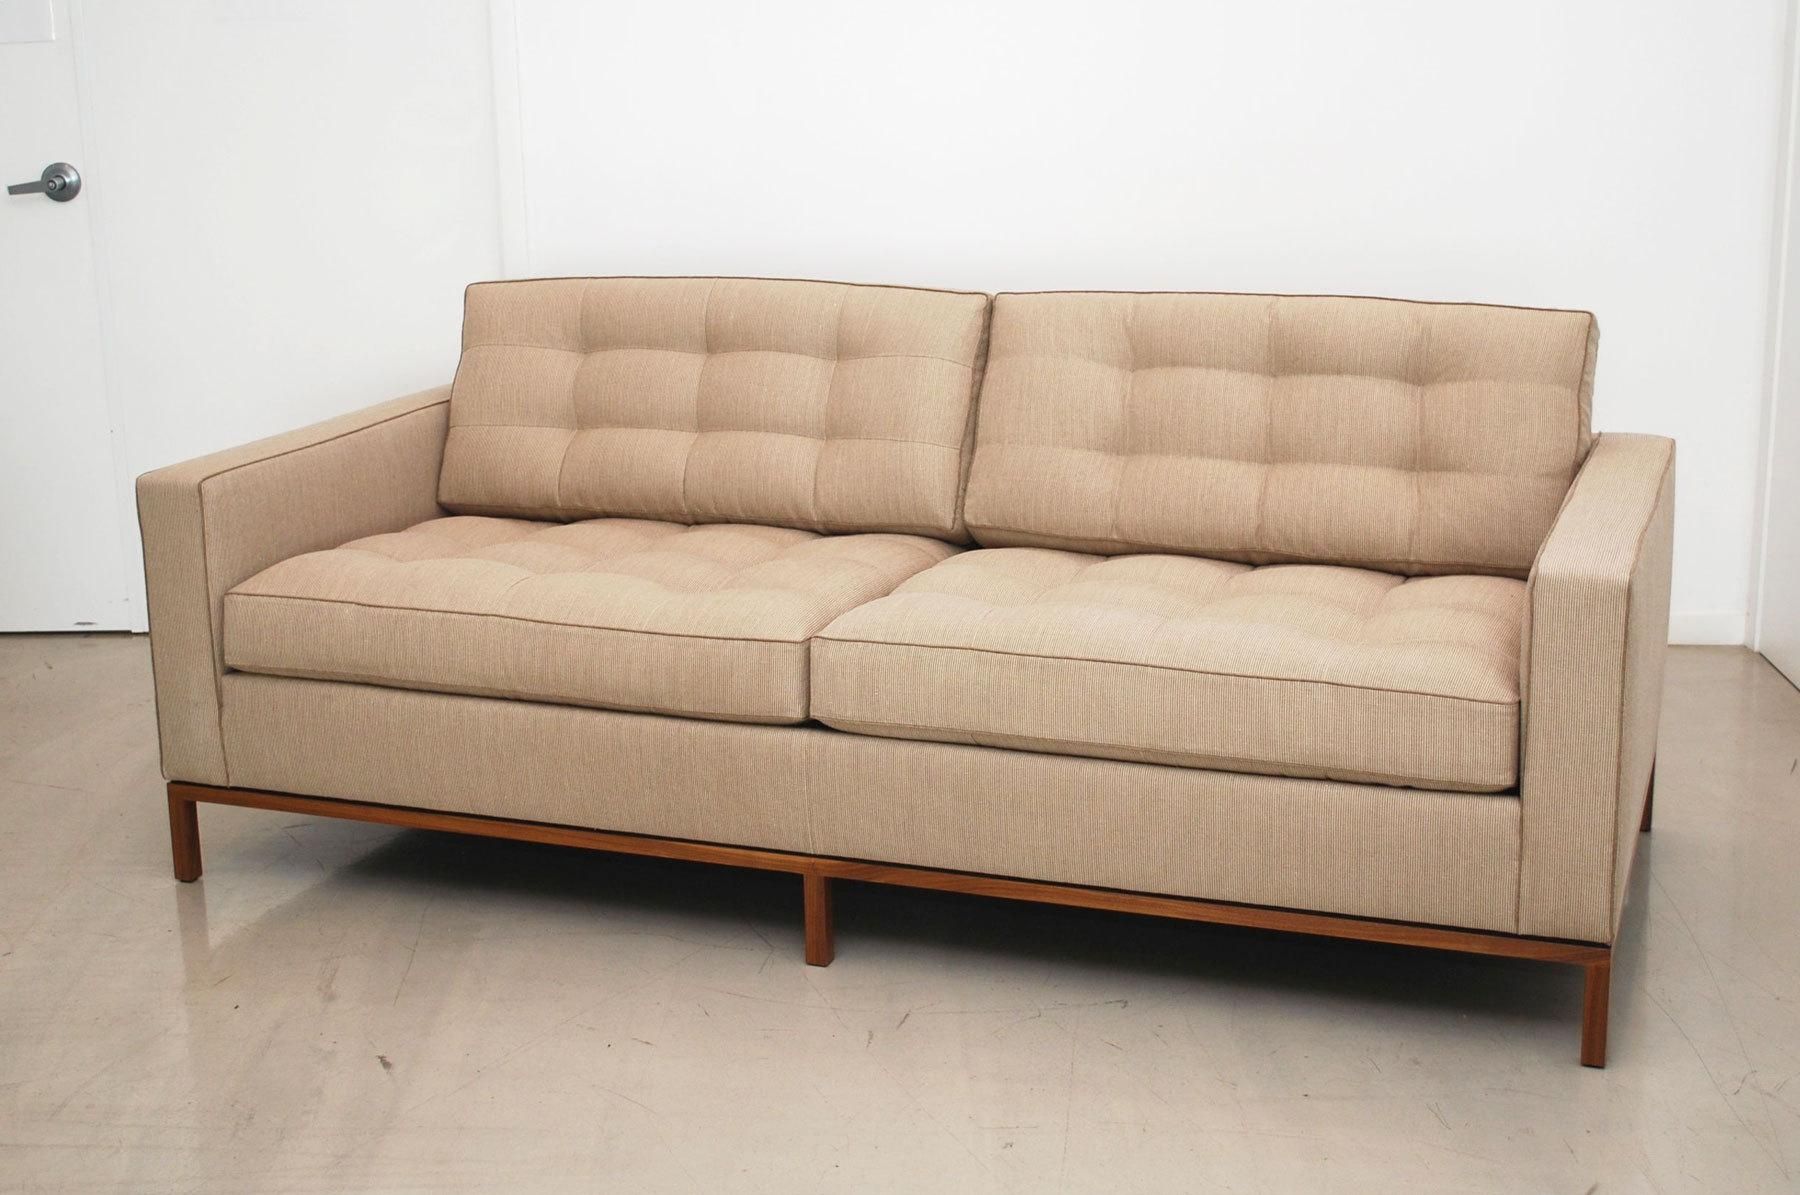 Simple Florence Knoll Sofa : New Florence Knoll Sofa – Home Decor Throughout Knoll Sofas (View 14 of 20)